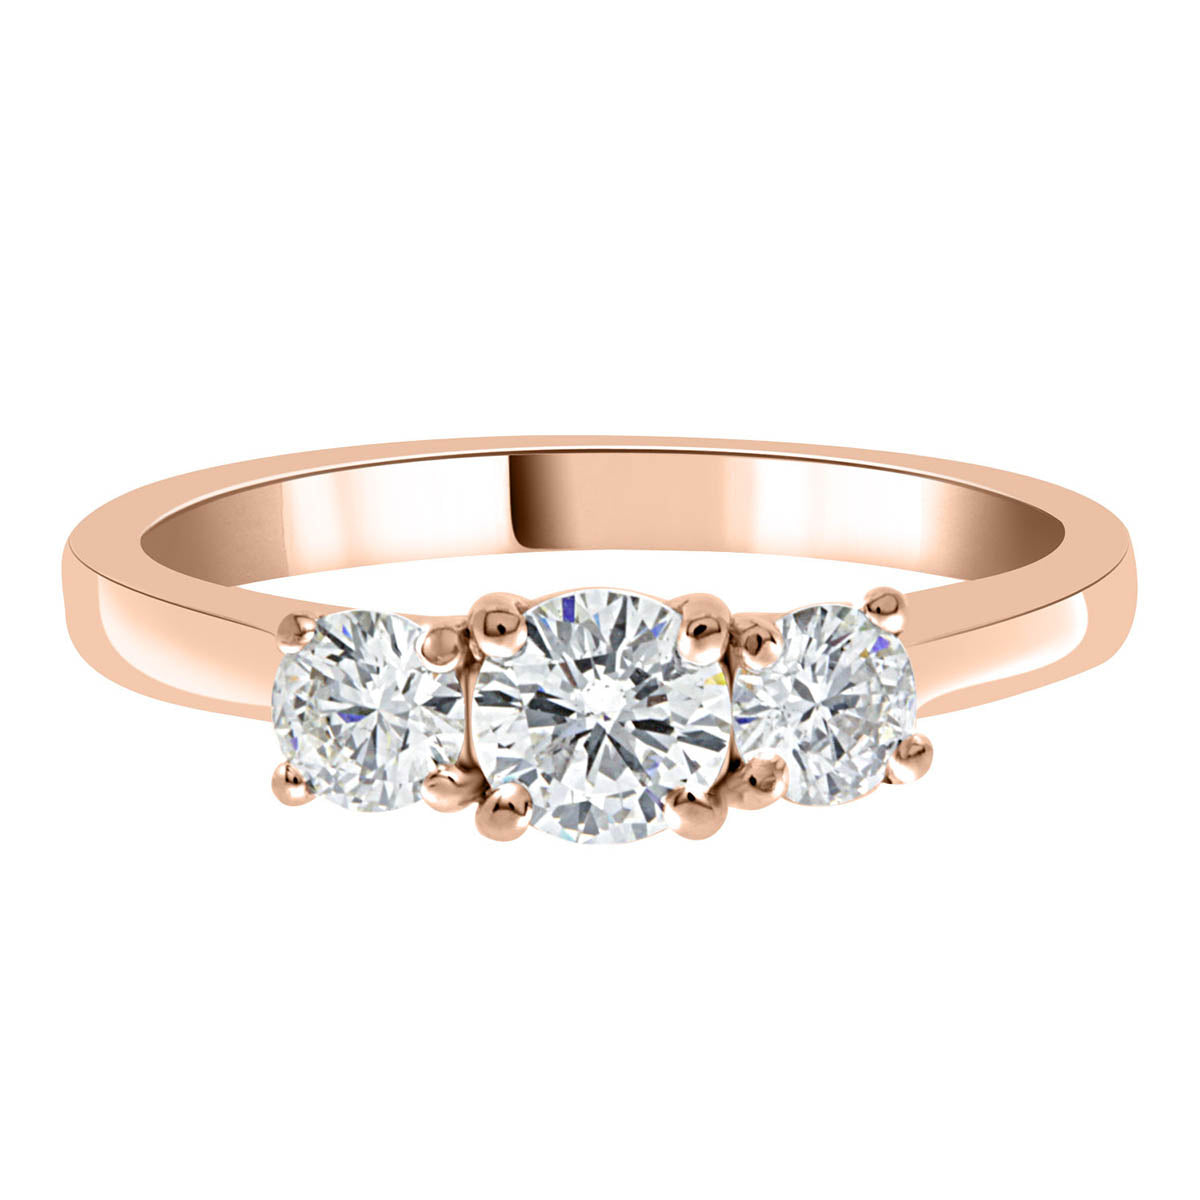 Trilogy Engagement Ring made in rose gold